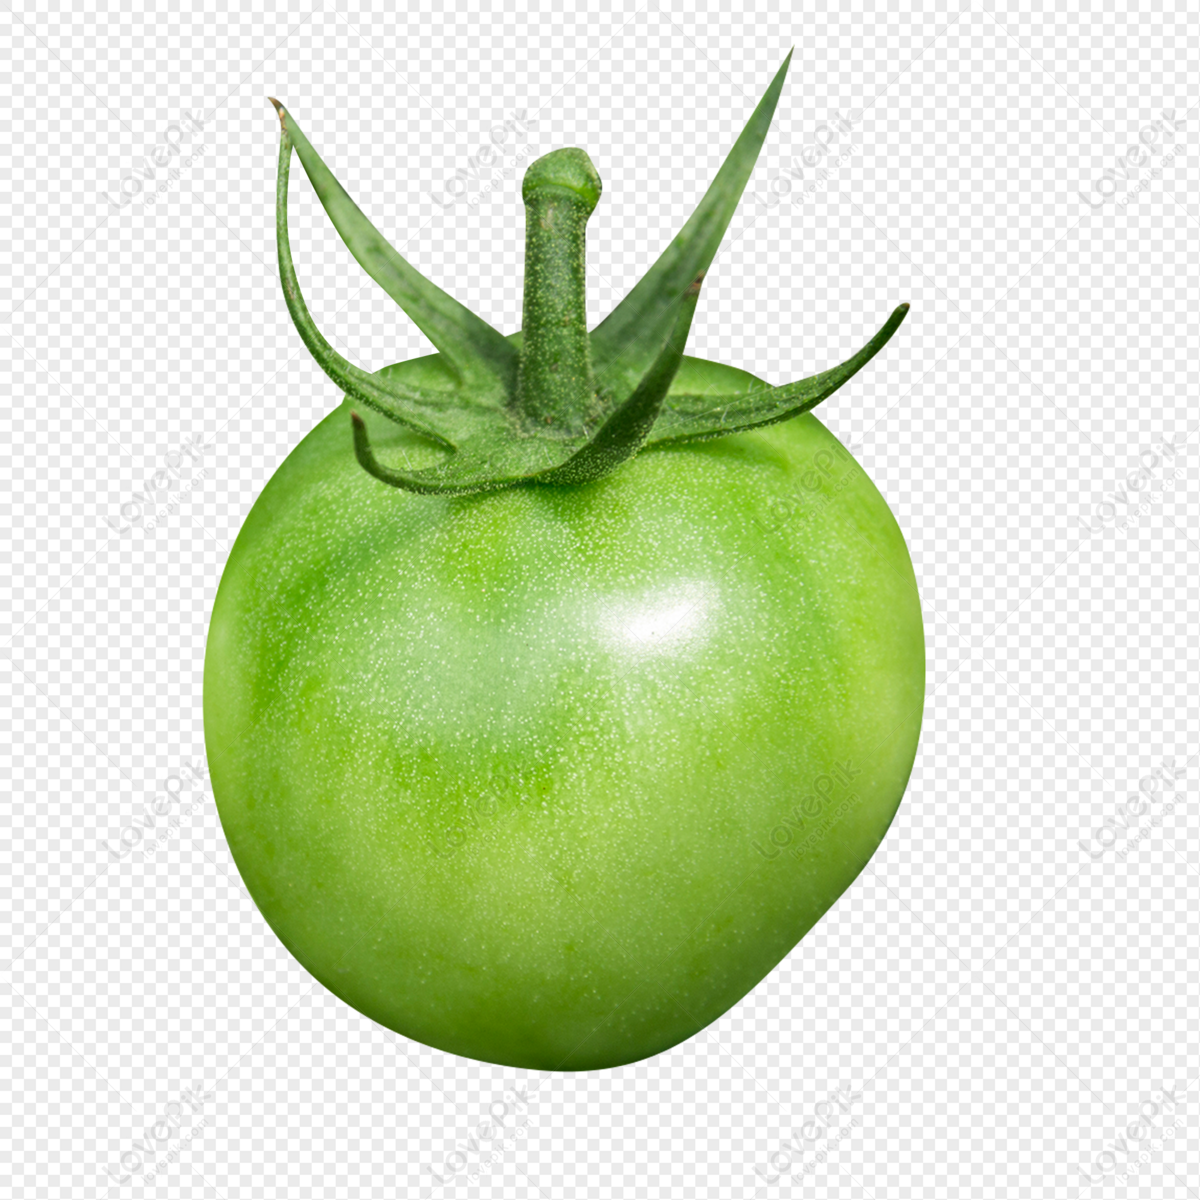 Cherry Tomatoes Green Fruits And Vegetables PNG Transparent And Clipart  Image For Free Download - Lovepik | 402005756